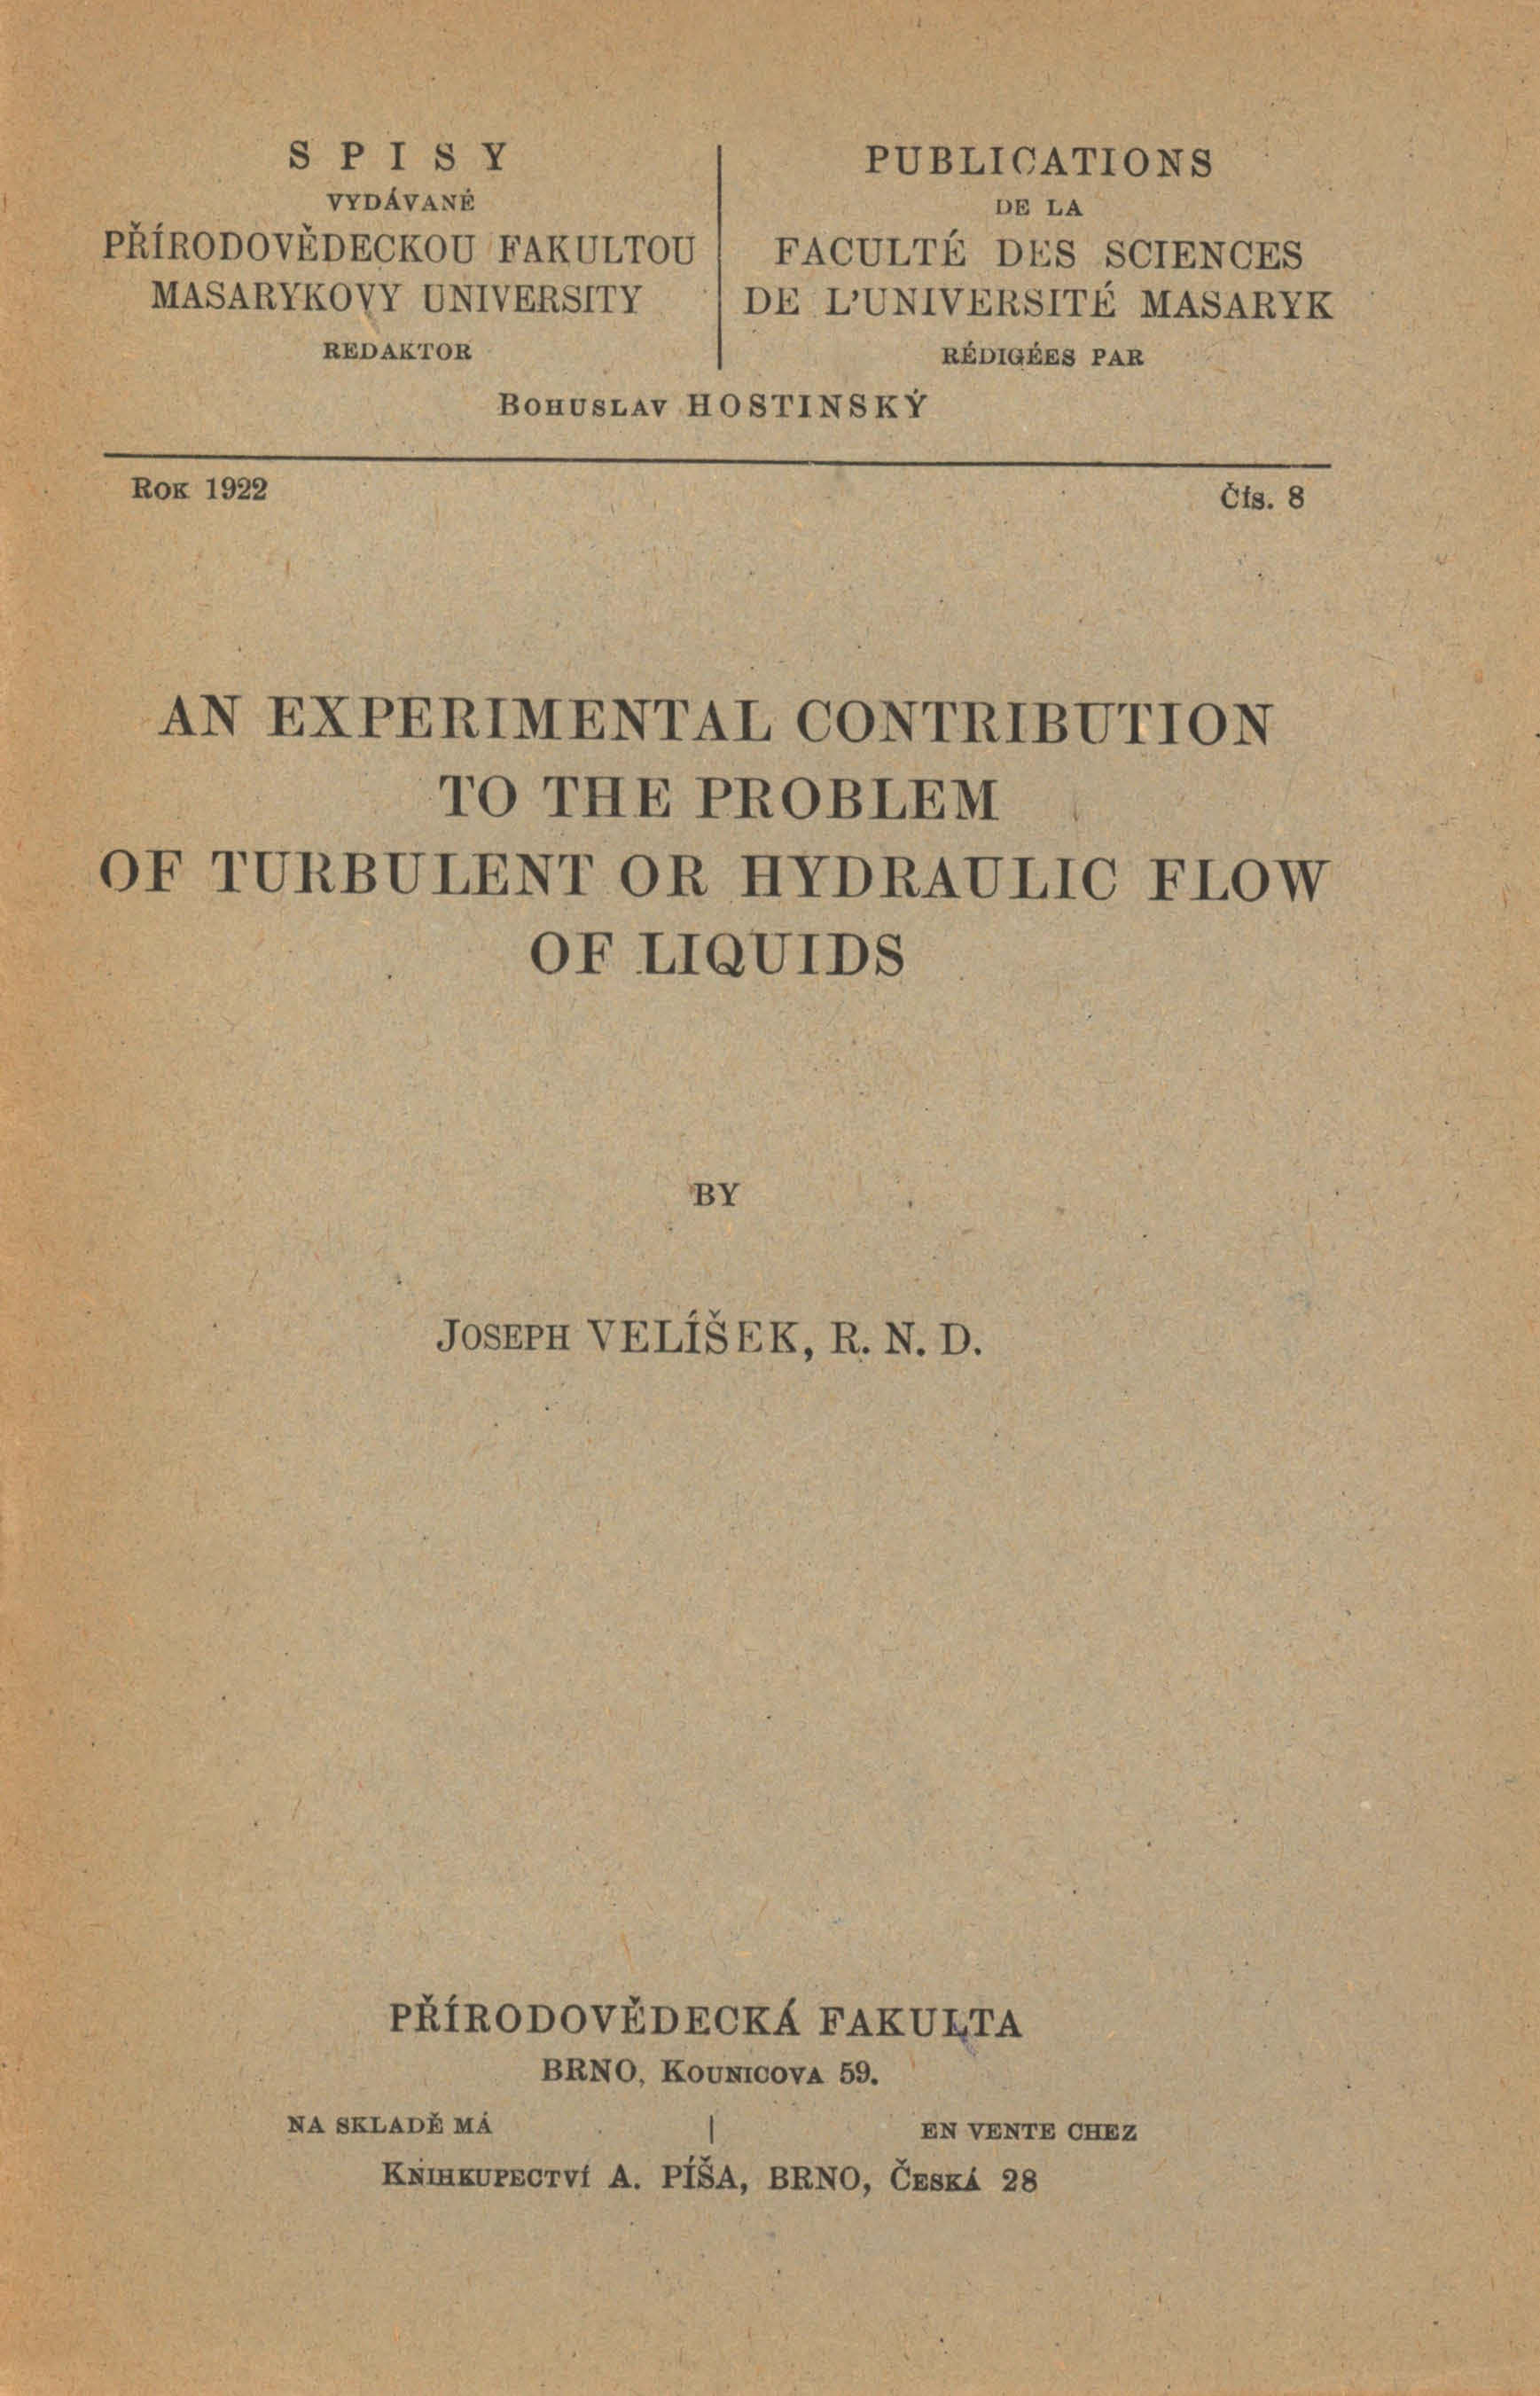 Obálka pro An experimental contribution to the problem of turbulent of hydraulic flow of liquids